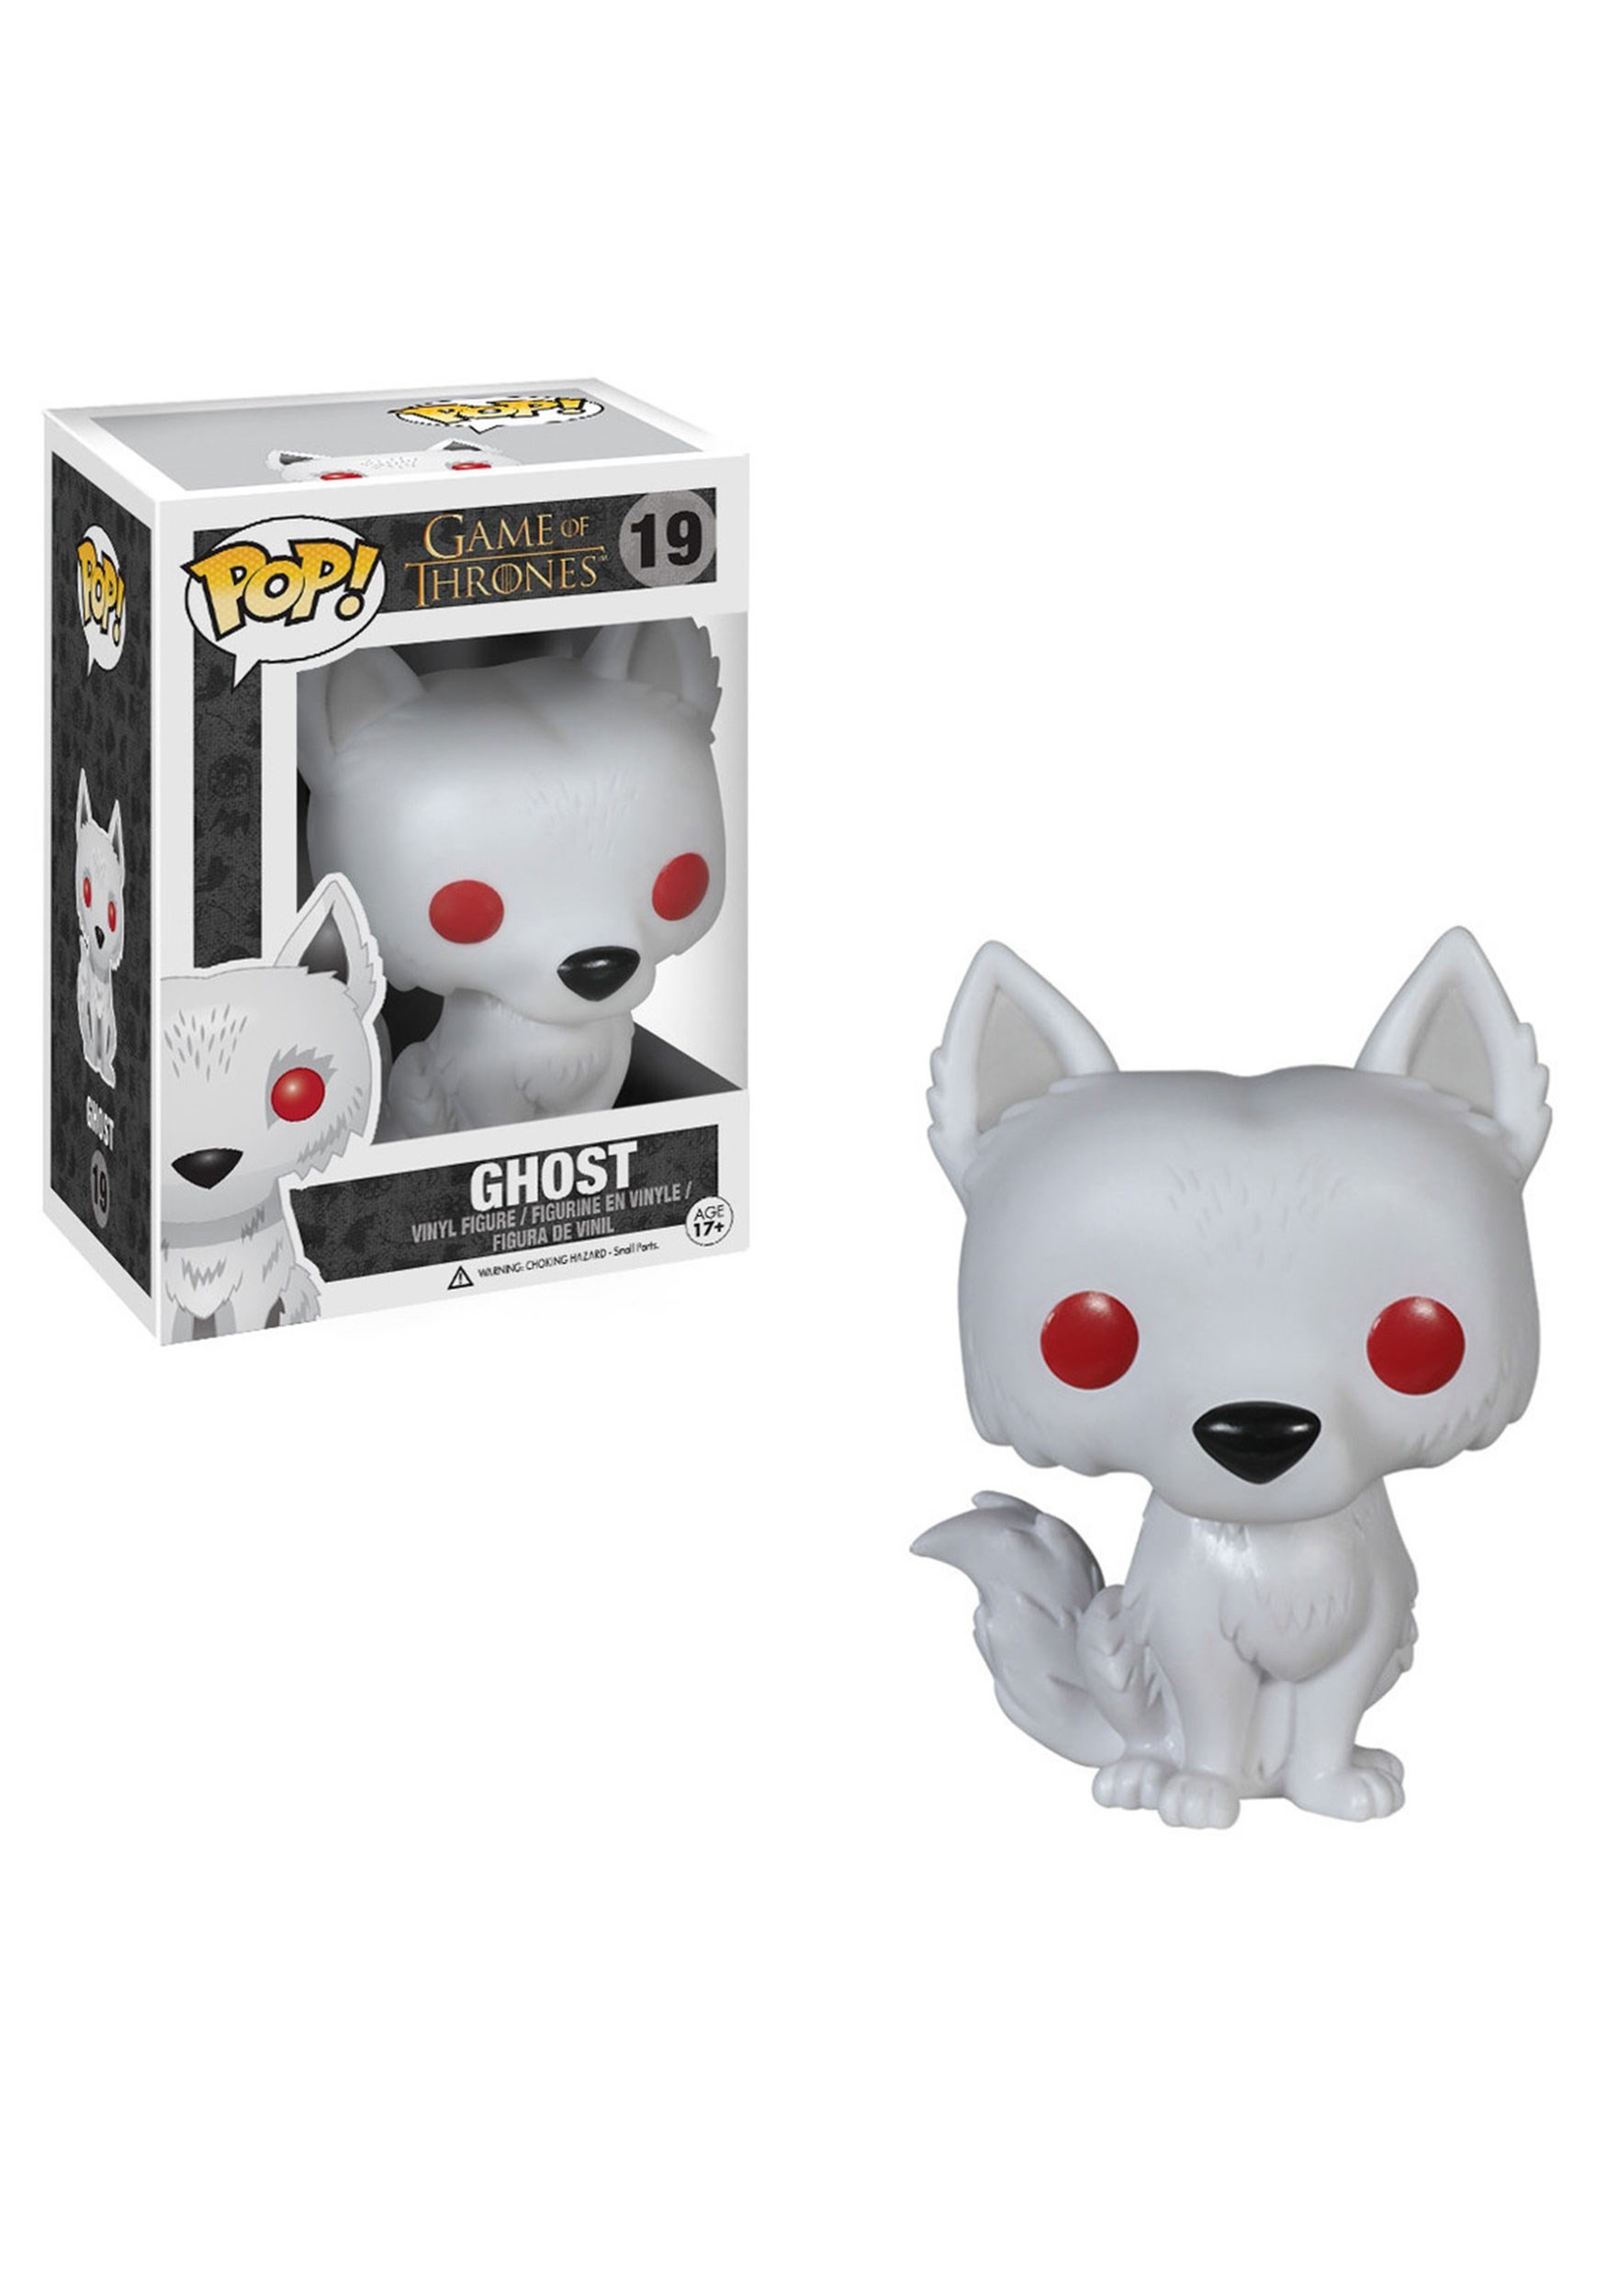 Ghost #3876 Funko POP Game of Thrones 